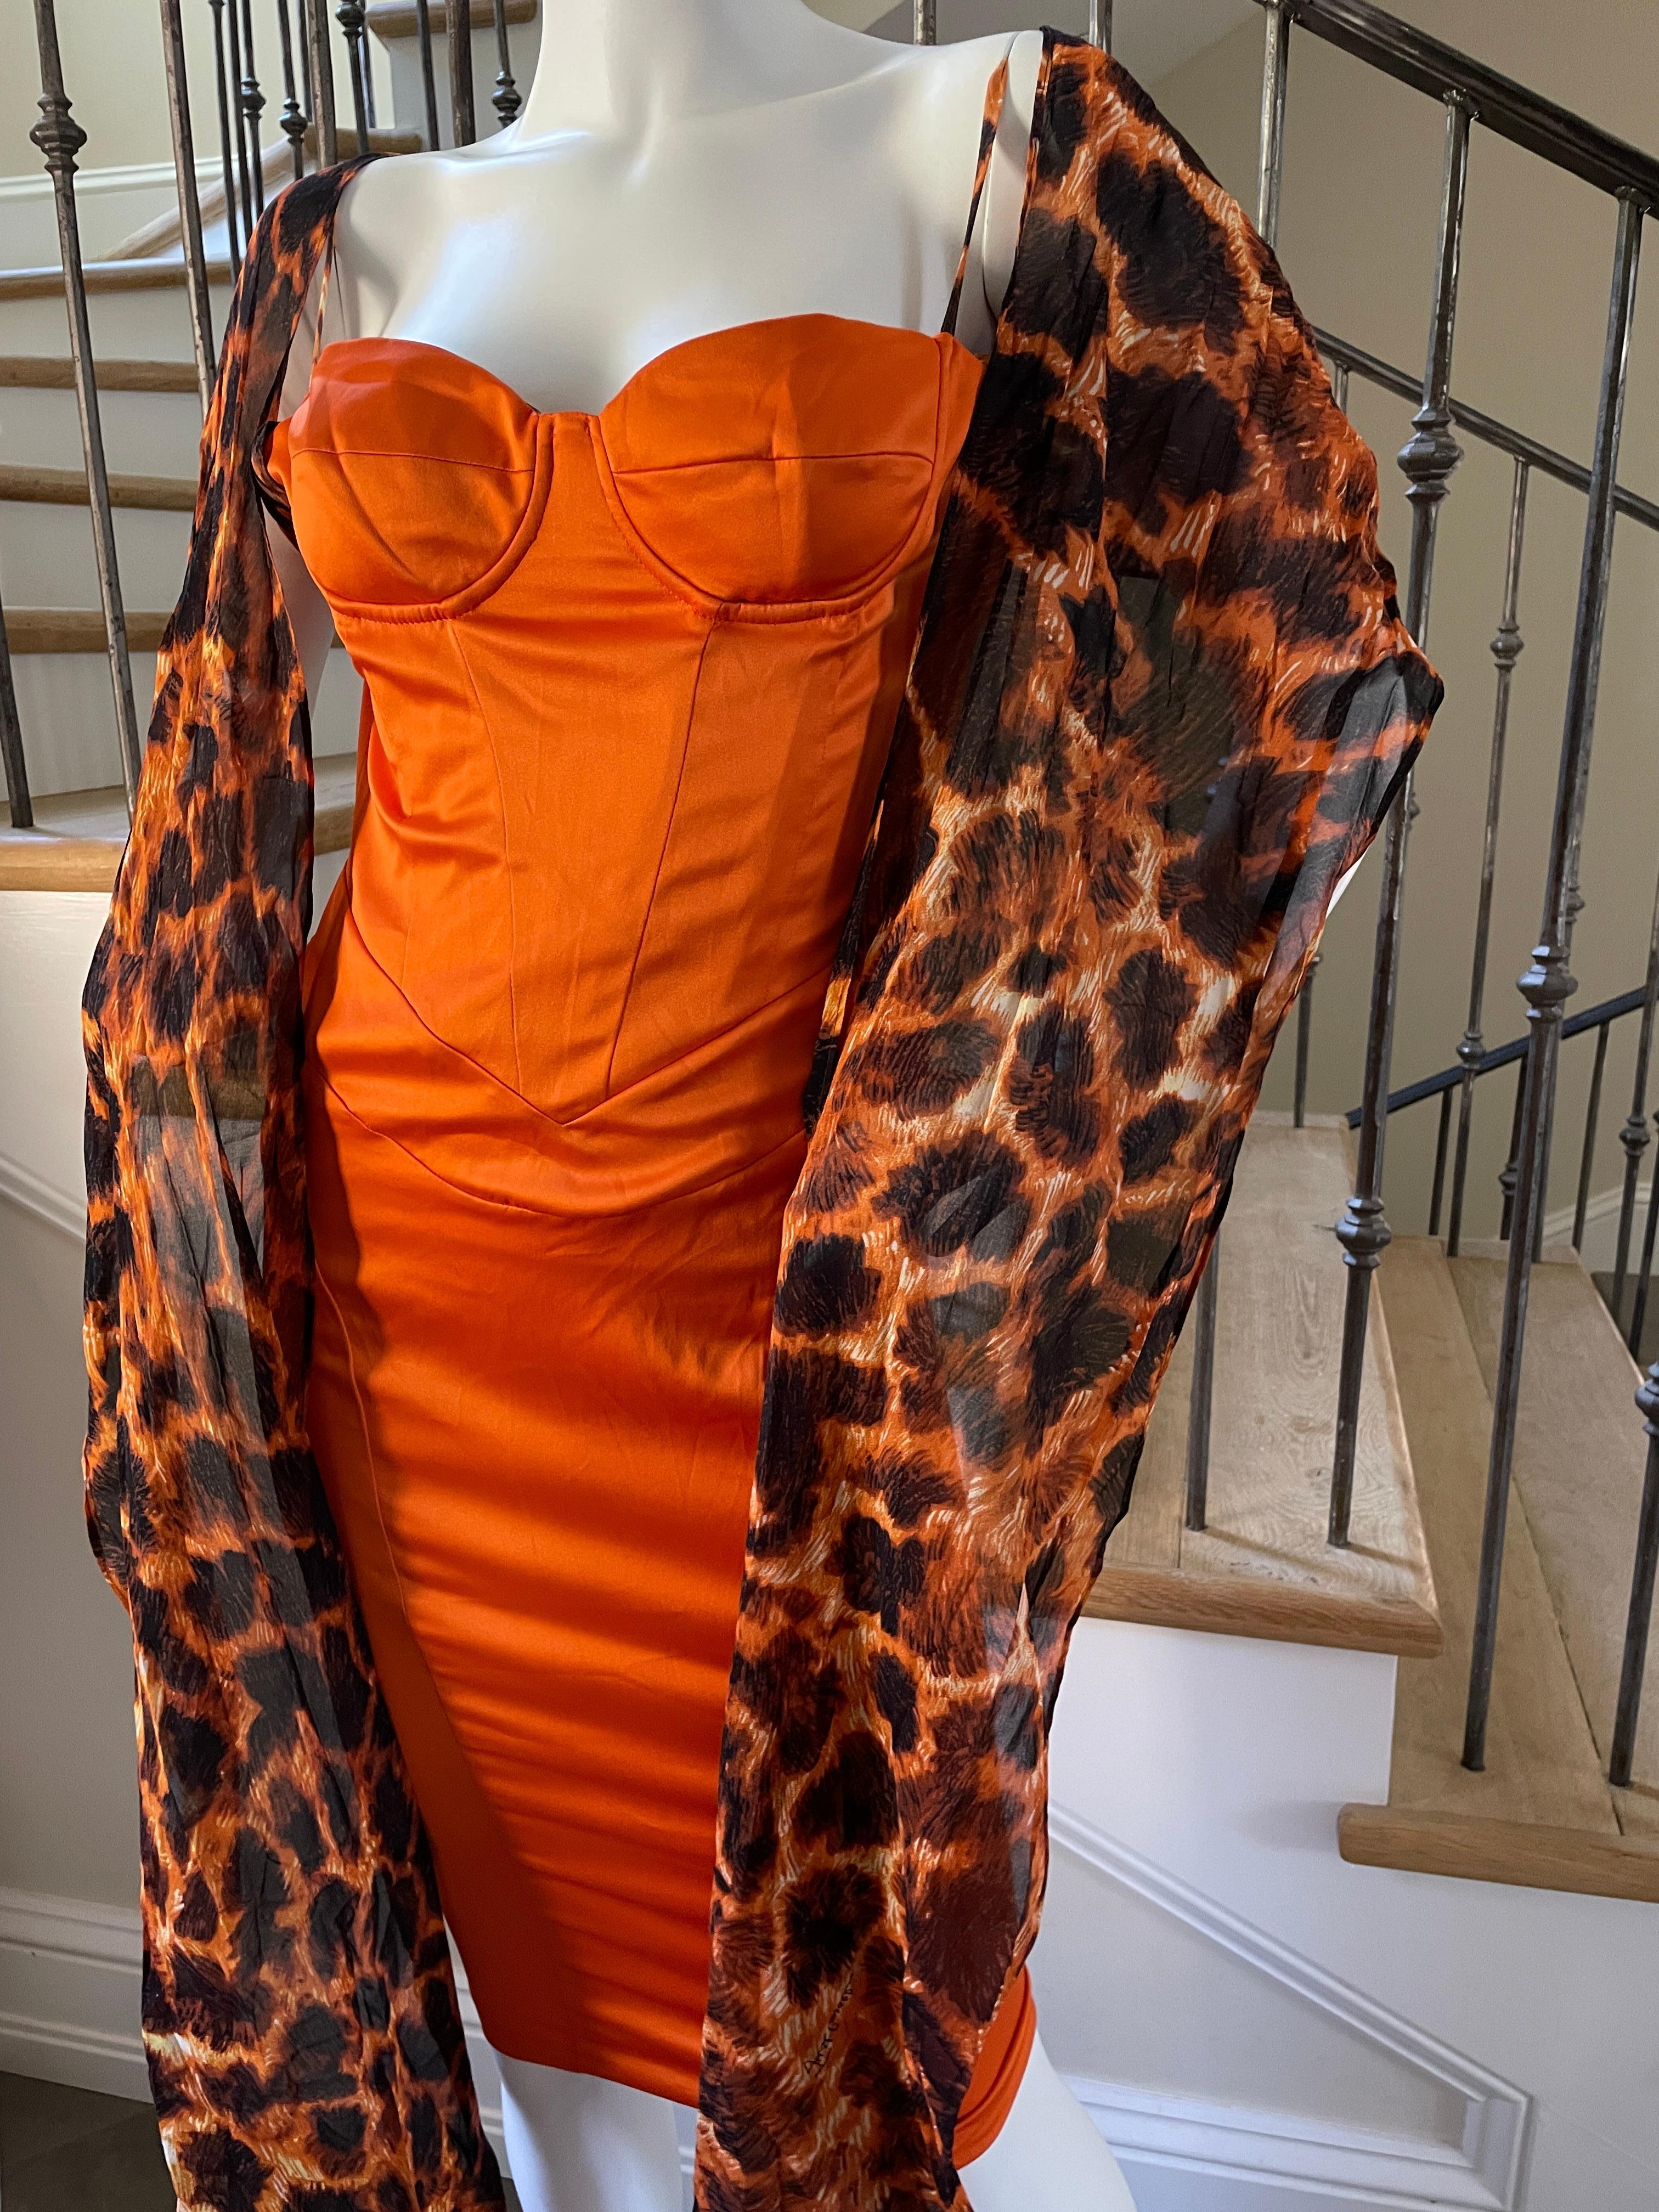 Just Cavalli Vintage Orange Corset Dress with Attached Animal Print Scarves For Sale 2